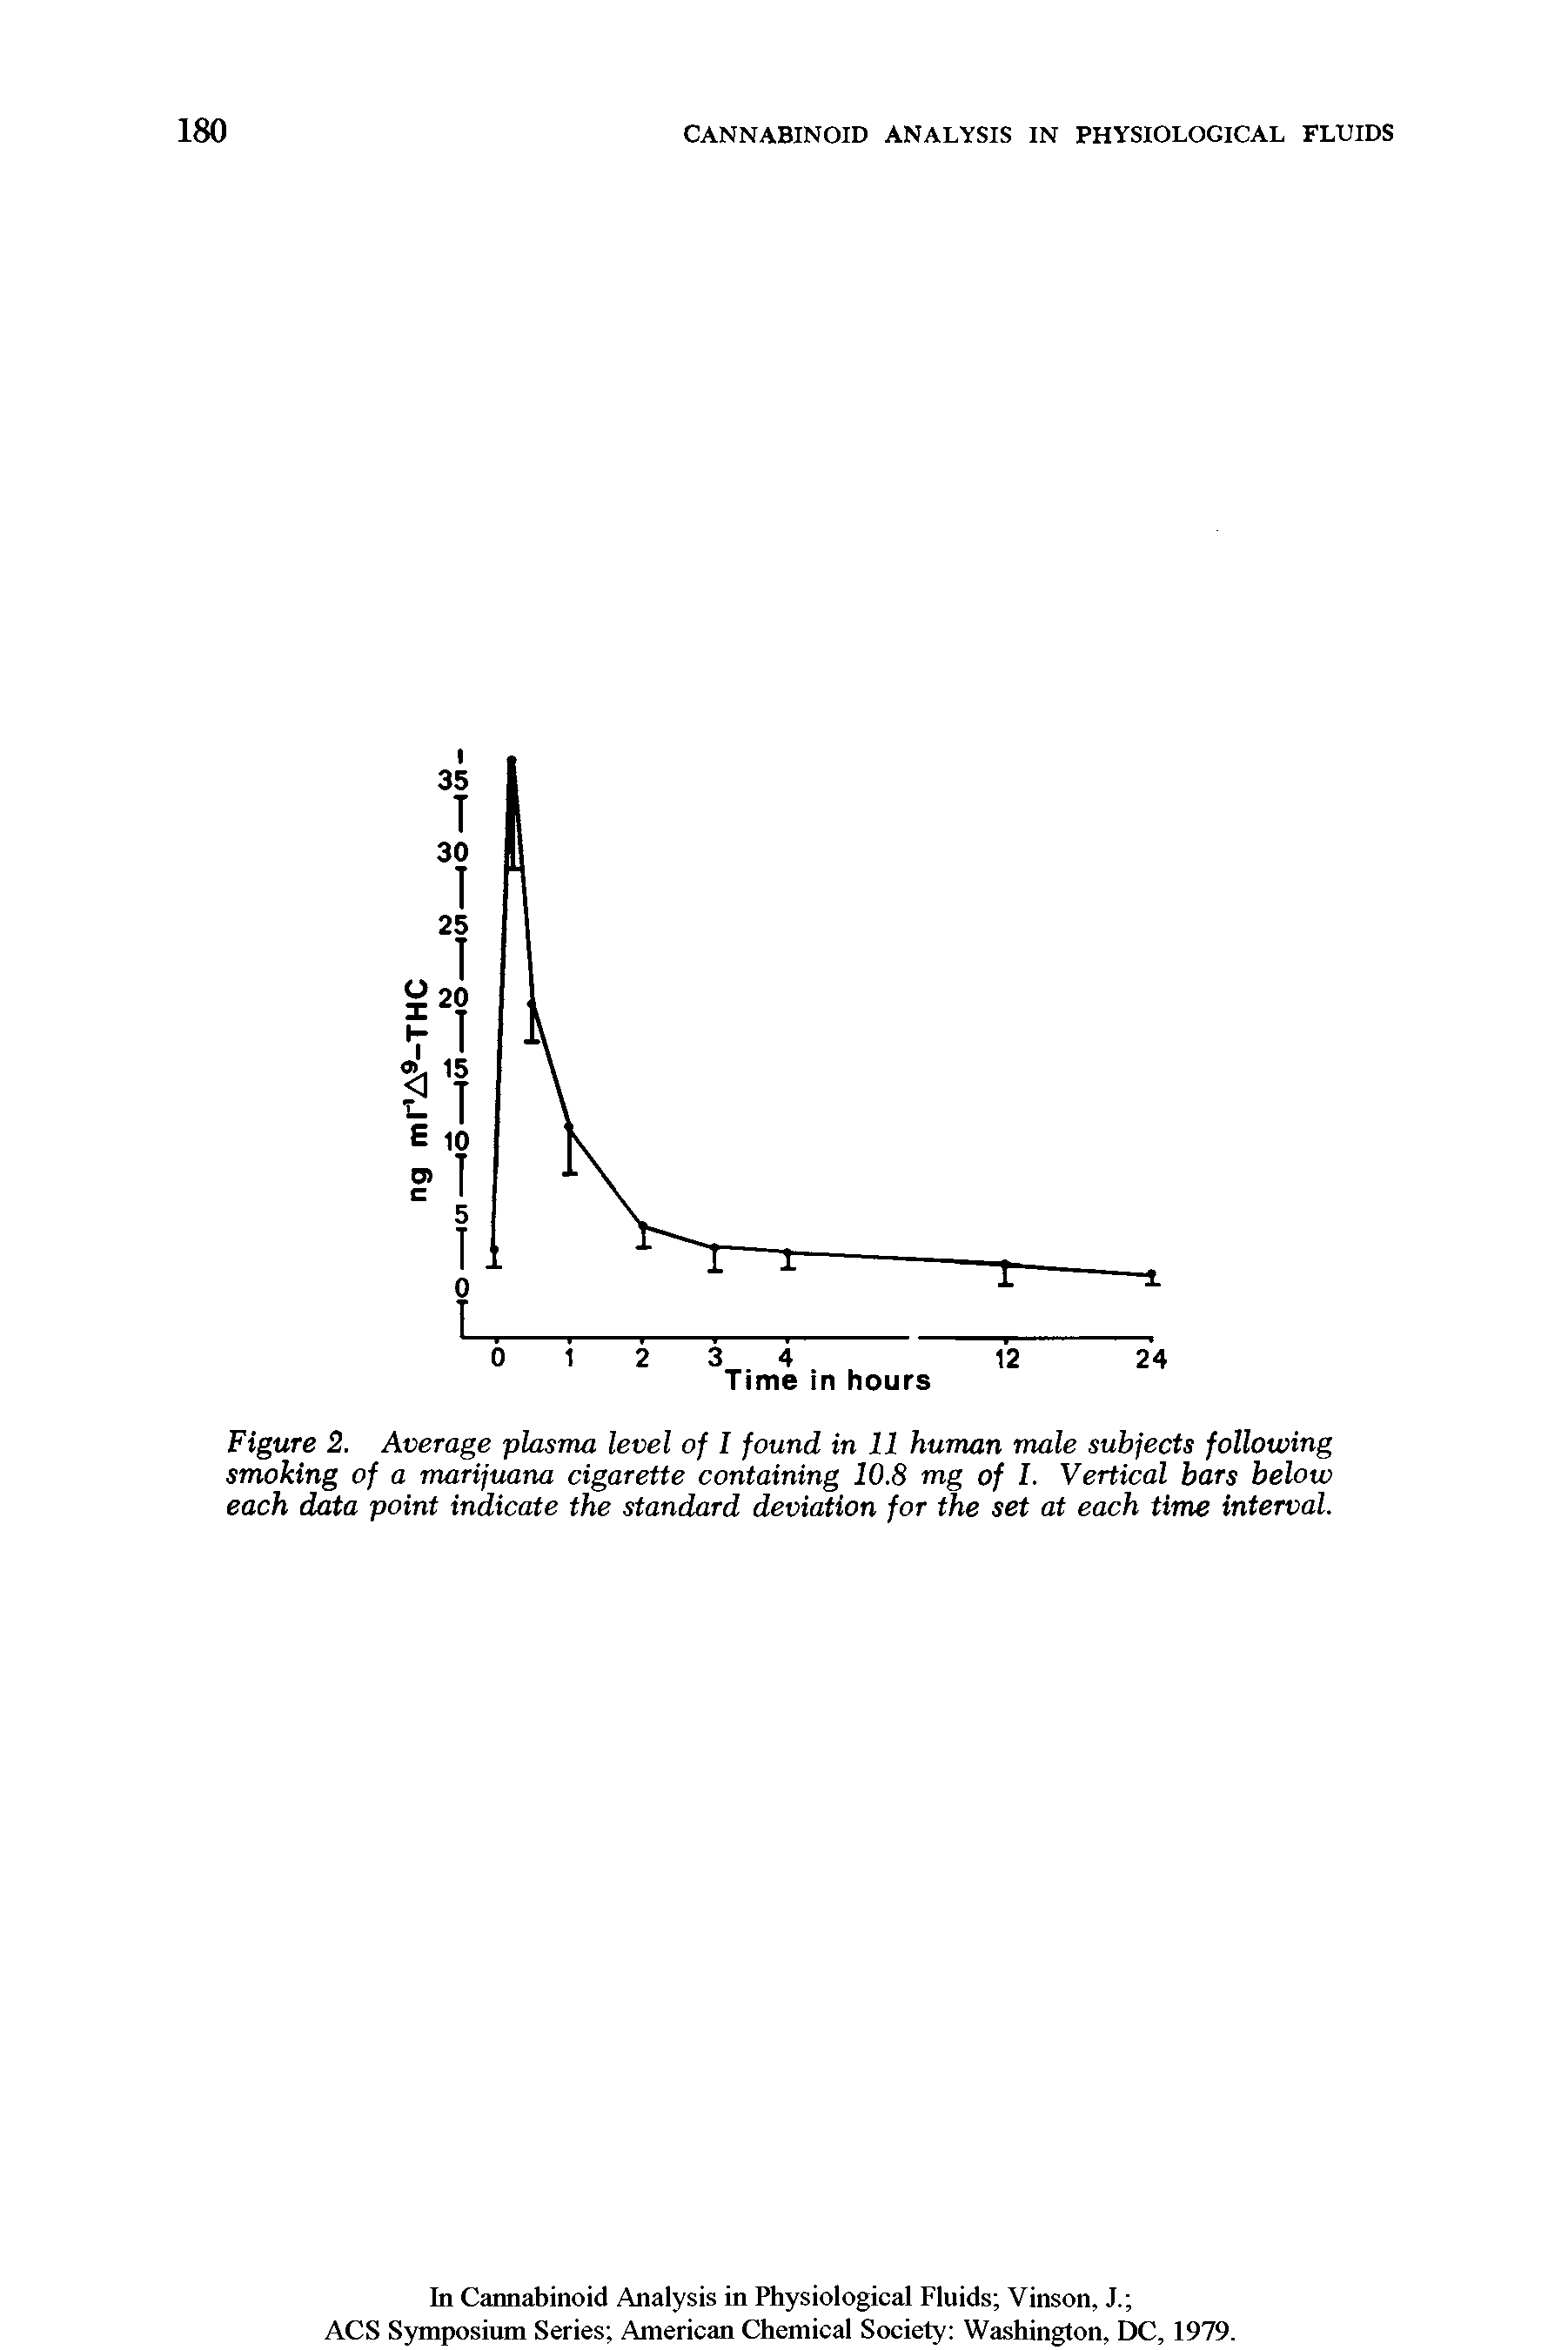 Figure 2. Average plasma level of I found in 11 human male subjects following smoking of a marijuana cigarette containing 10.8 mg of I. Vertical bars below each data point indicate the standard deviation for the set at each time interval.